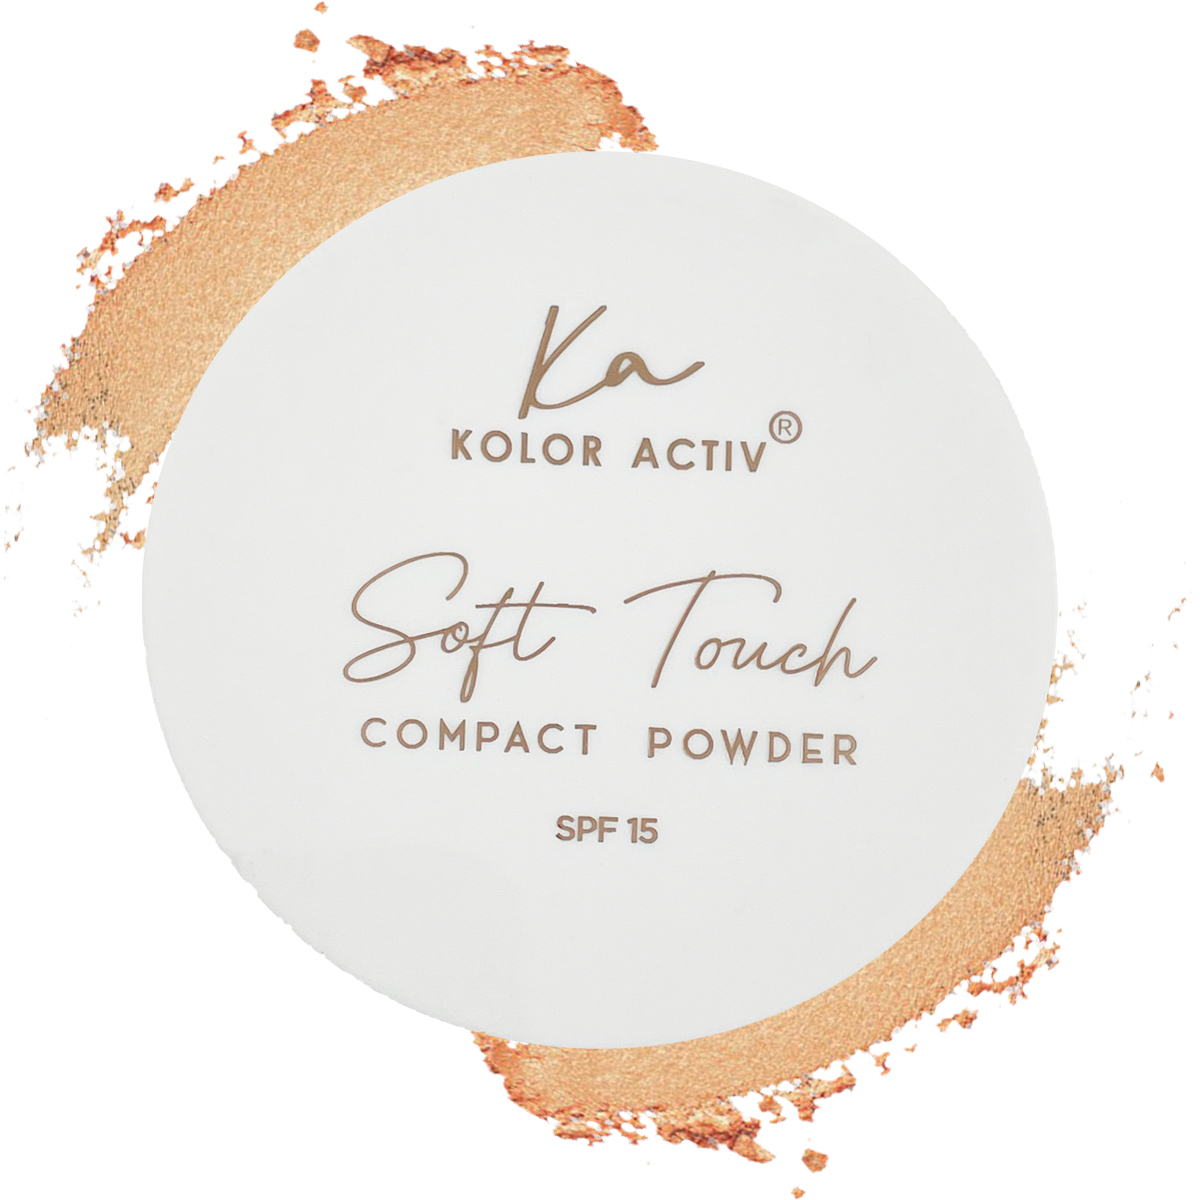 soft touch compact powder